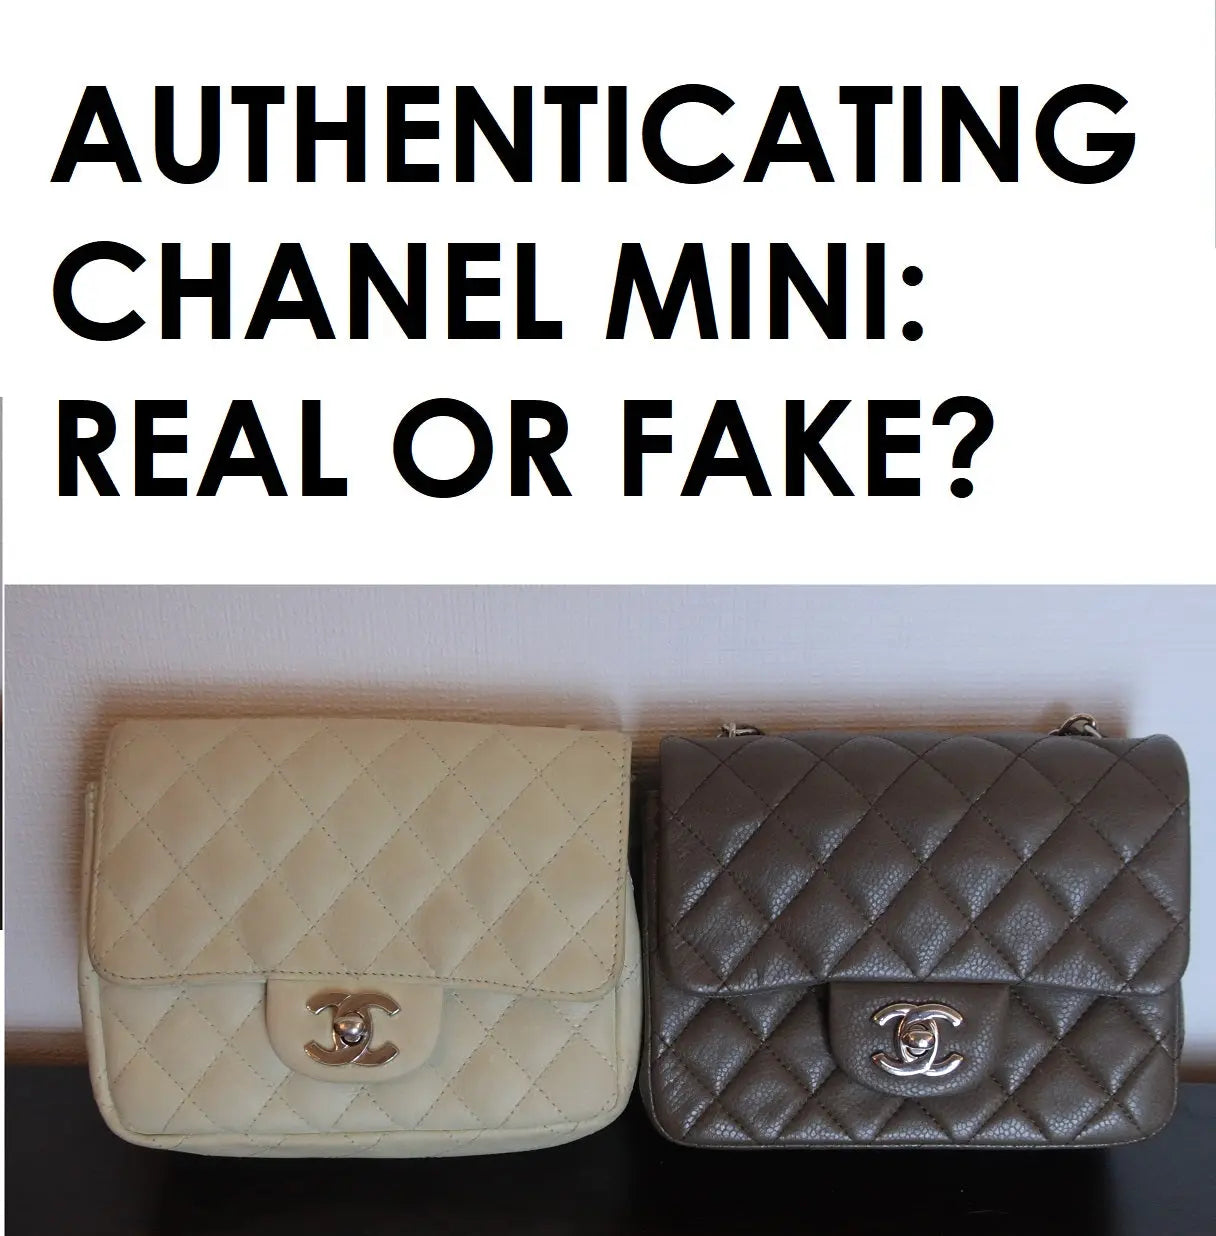 M Vintage Bags - Fake vs. Authentic Here's the sample